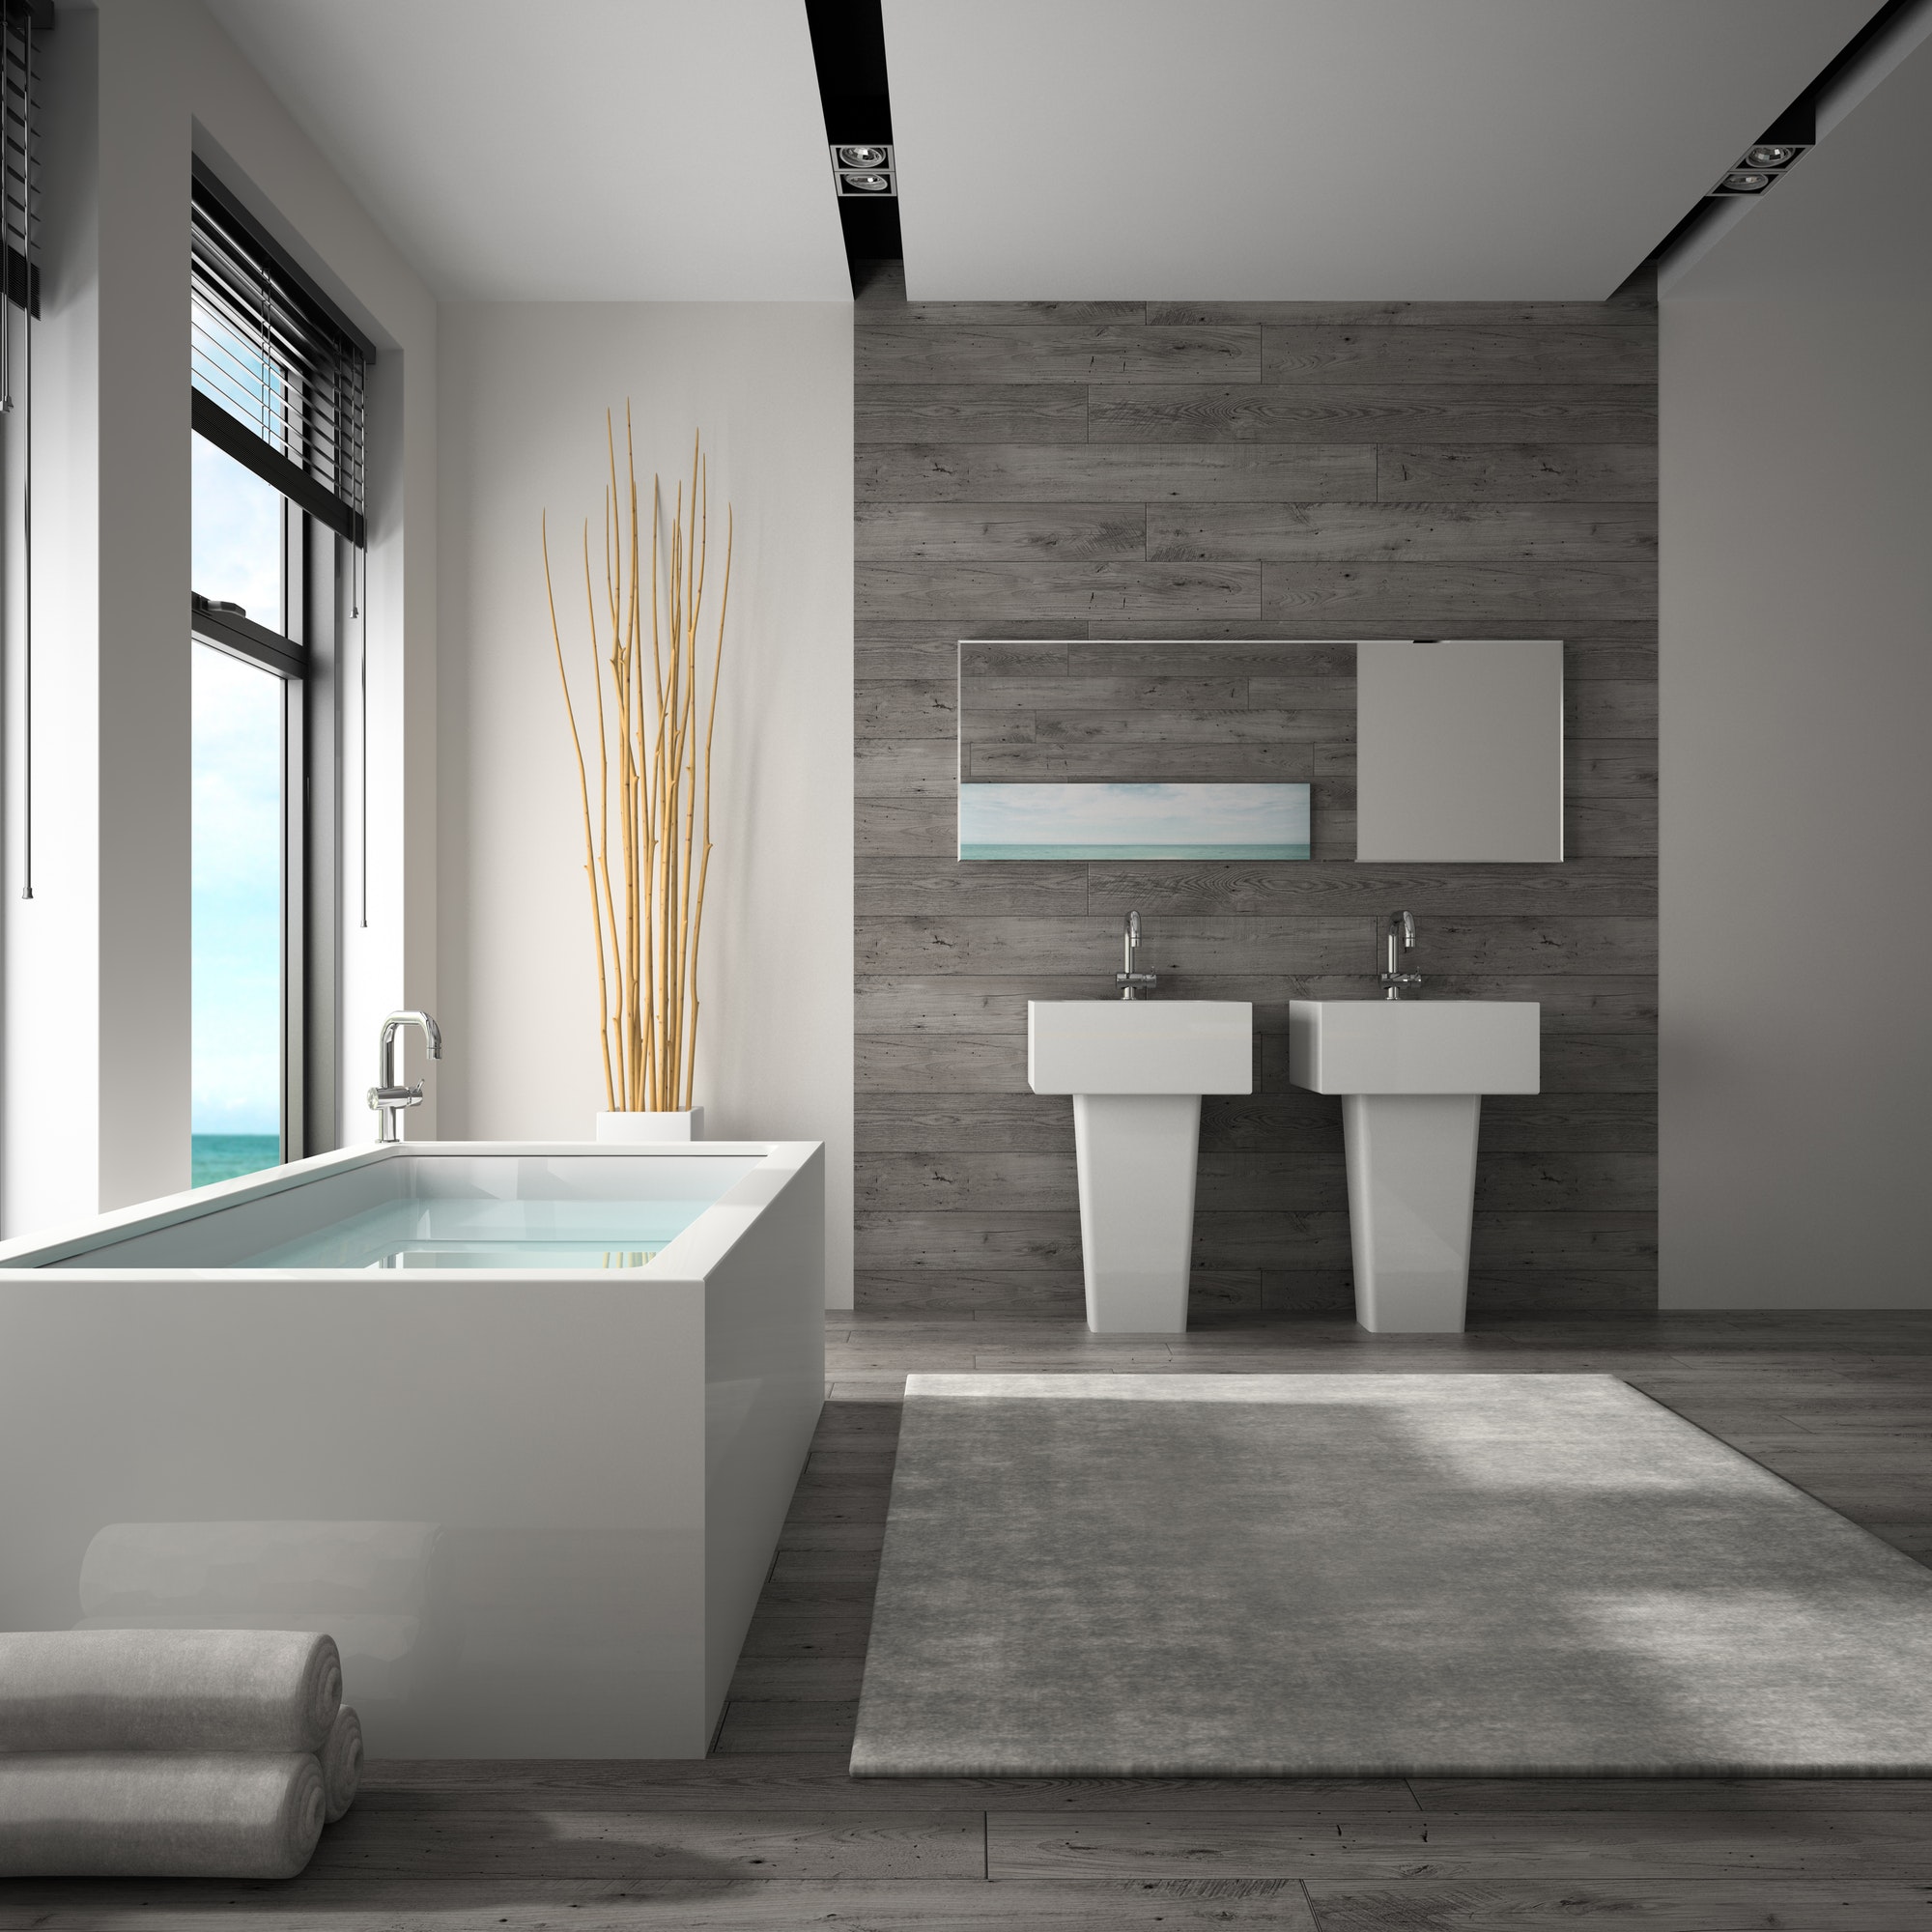 Interior of bathroom with sea view 3D rendering